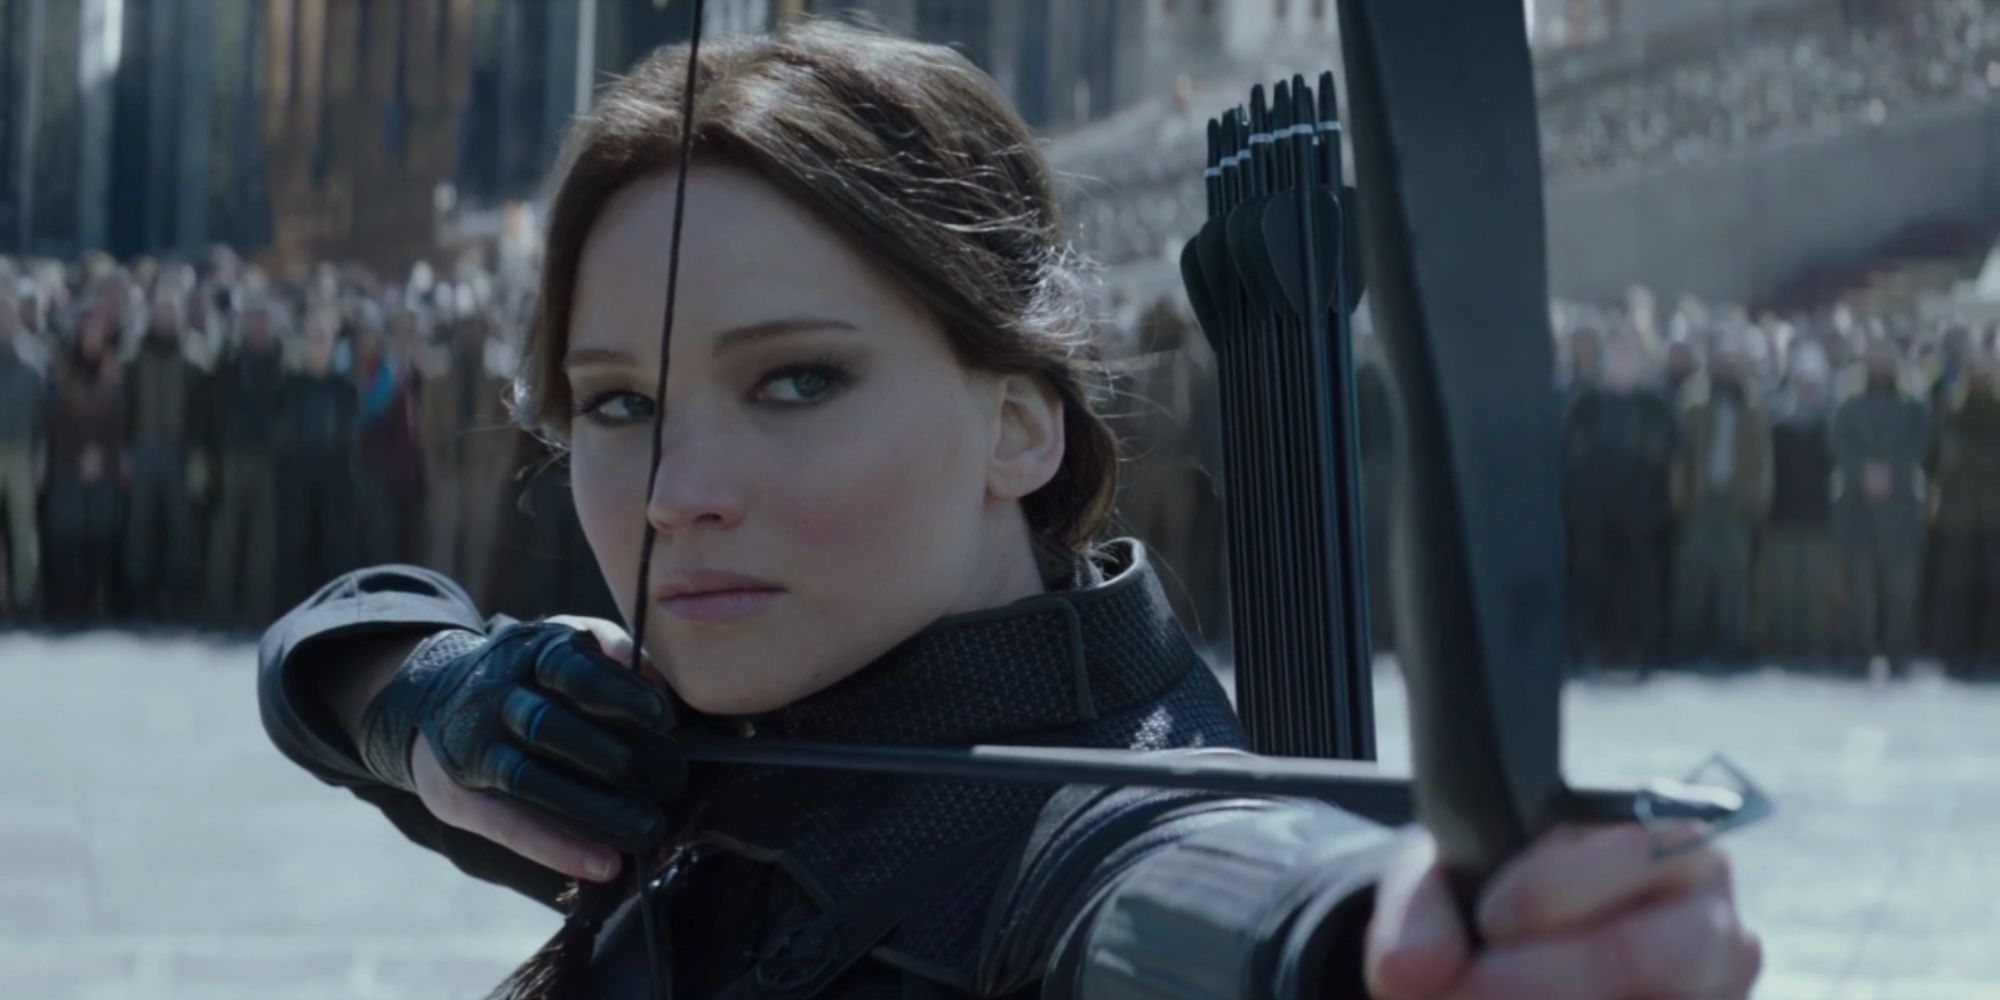 Katniss points her bow and arrow at President Snow in Hunger Games: Mockingjay